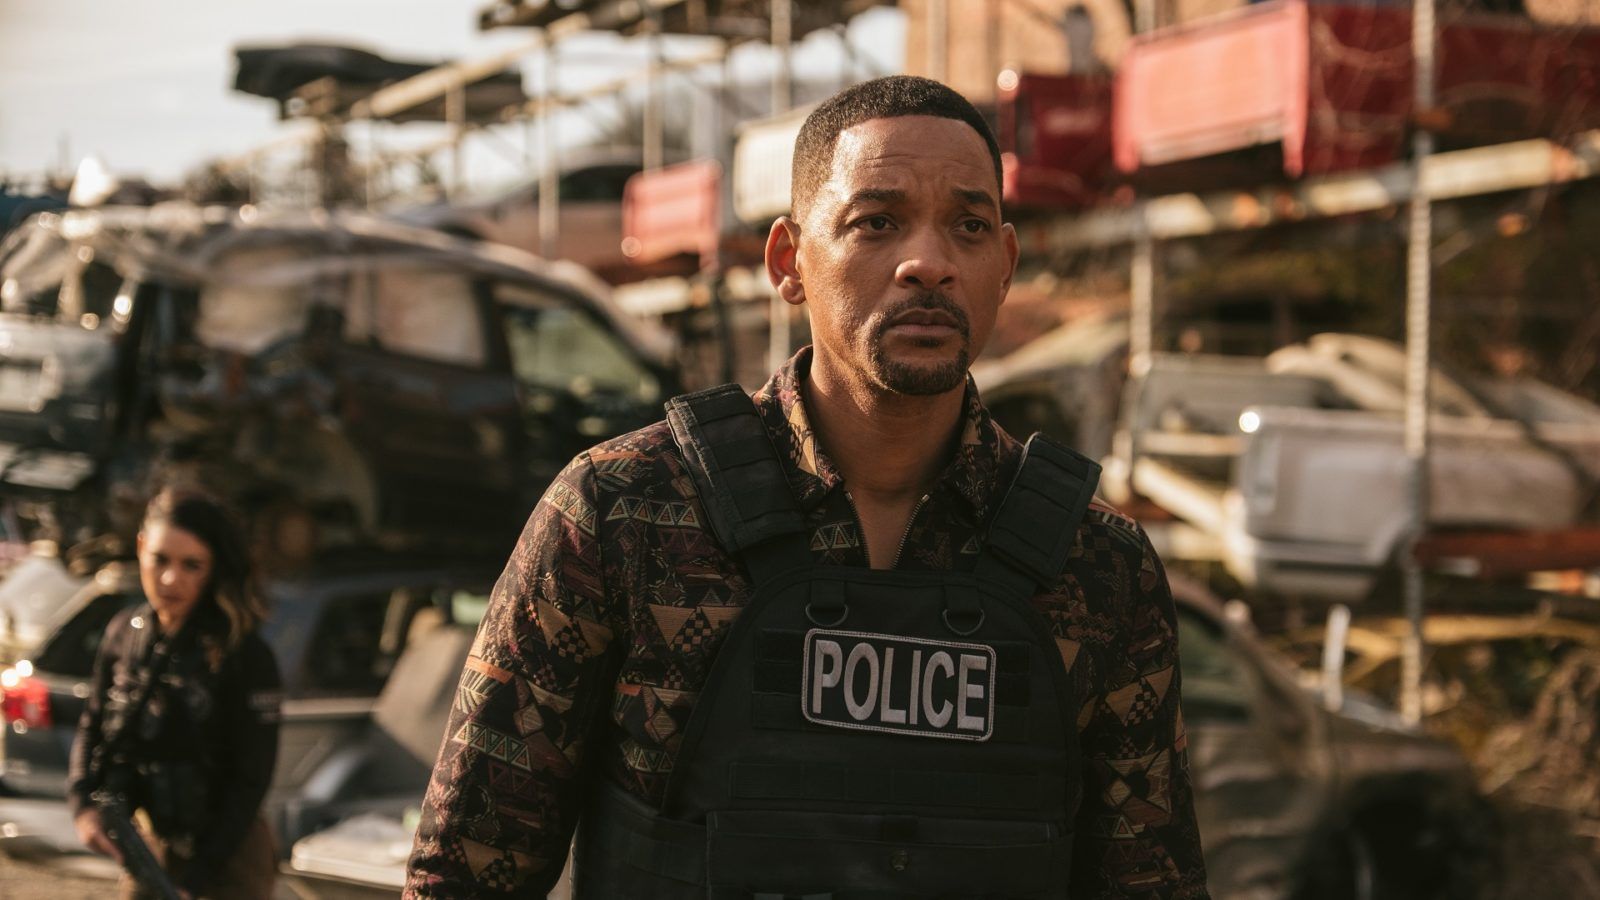 10 Will Smith movies and shows to watch after the Oscars